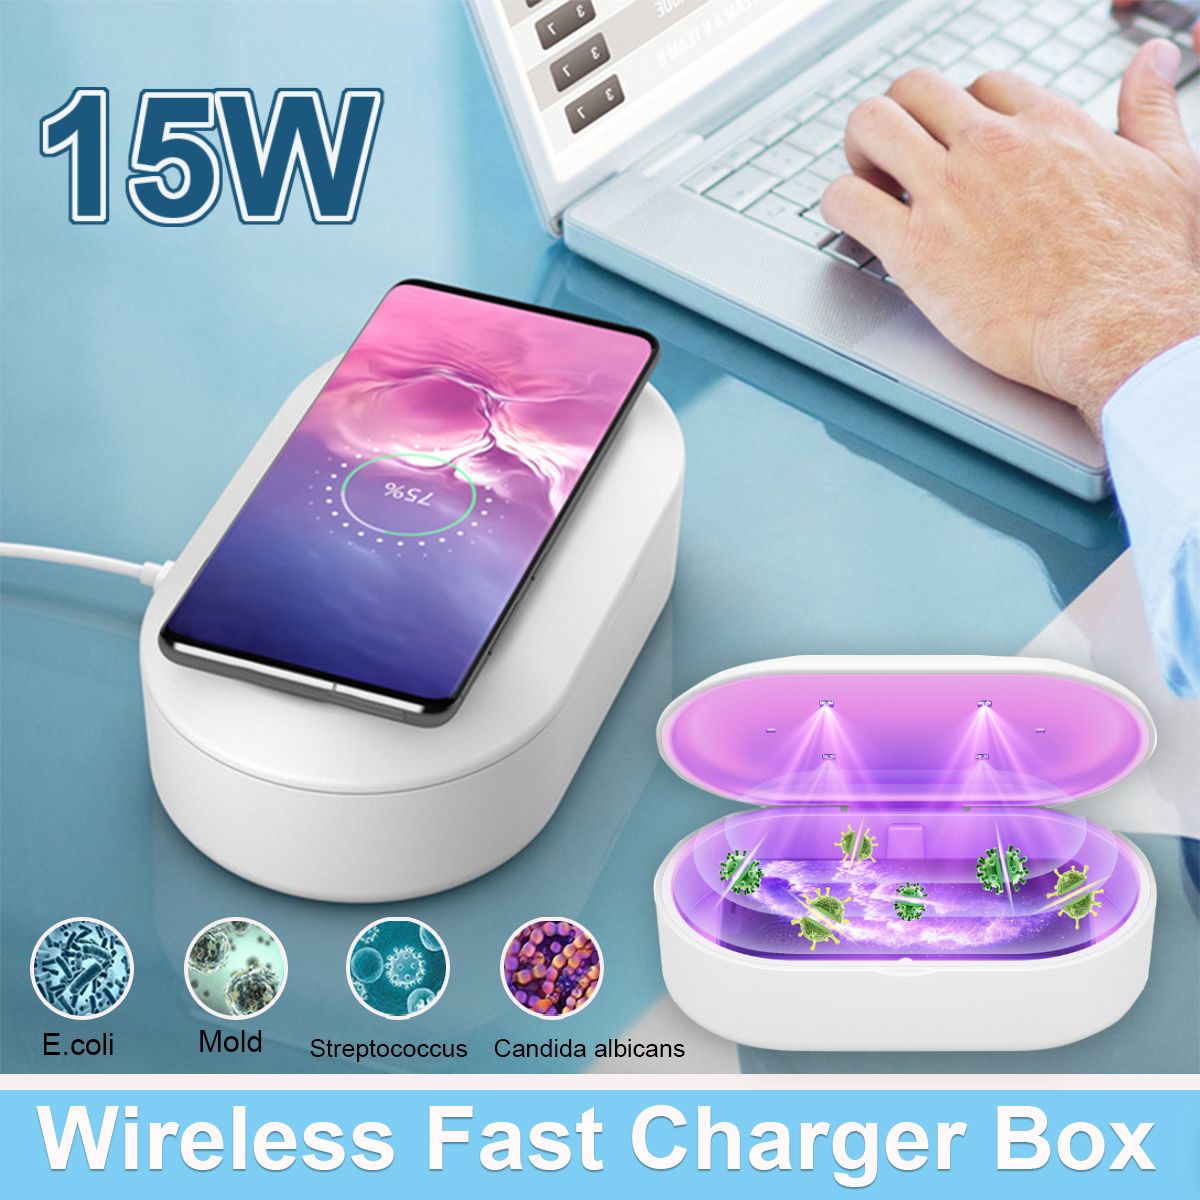 15W-Portable-Multifunctional-Phone-Disinfection-Box-Cleaner-Wireless-Charger-1730019